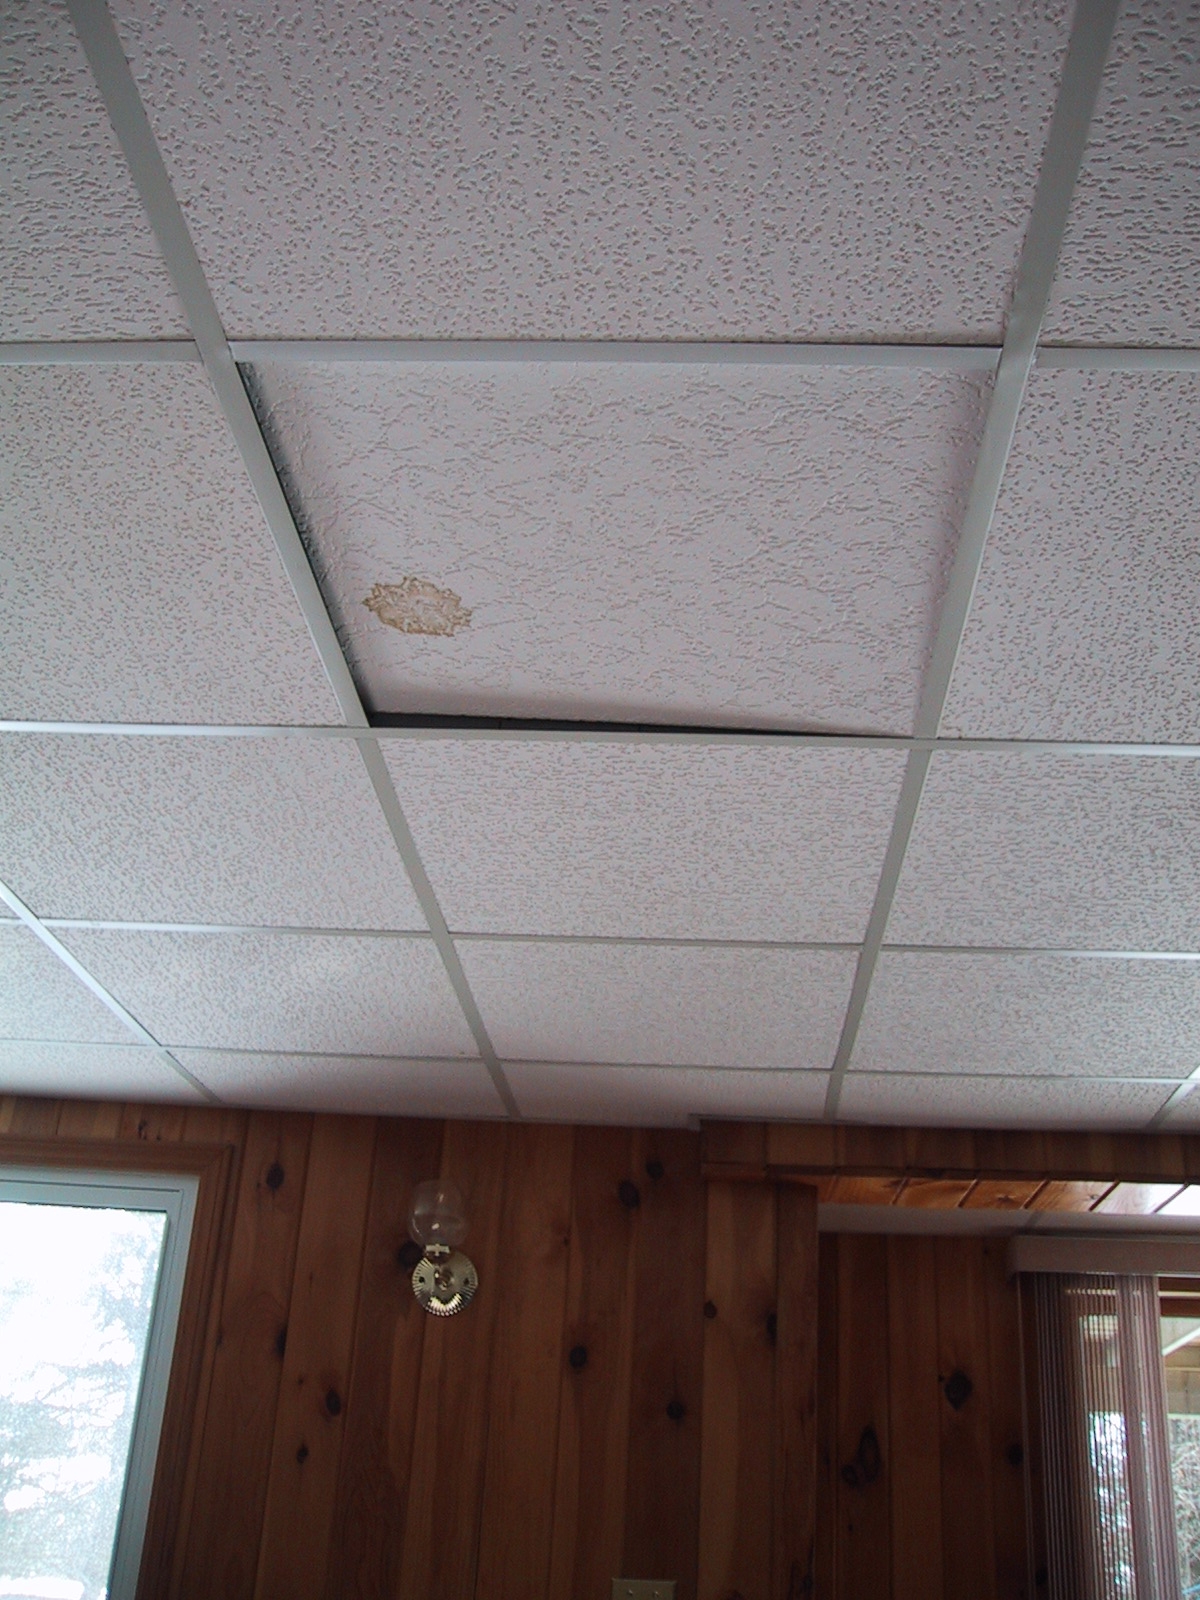 Types Of Ceiling Tiles For Basement Types Of Ceiling Tiles For Basement basement ceiling leak part 1 the discovery 1200 X 1600